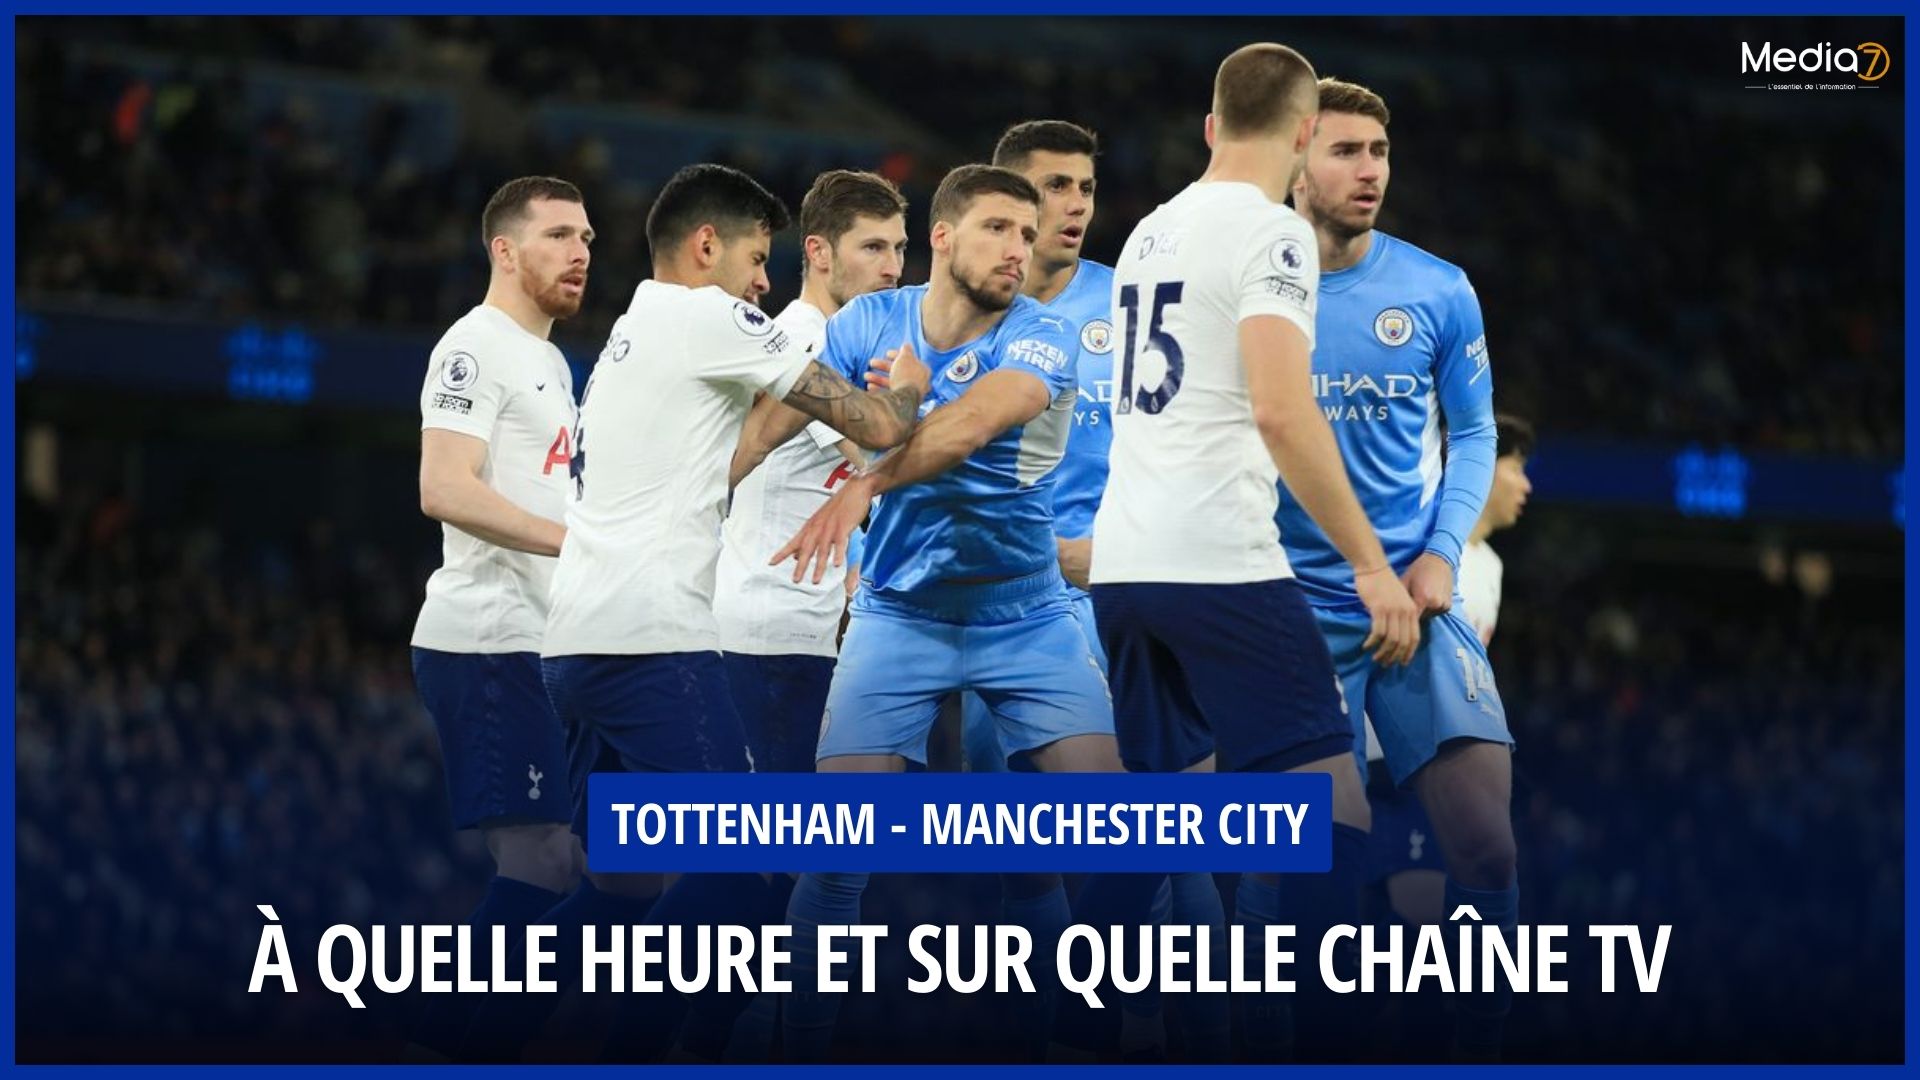 Tottenham - Manchester City match live: TV channel and broadcast time - Media7